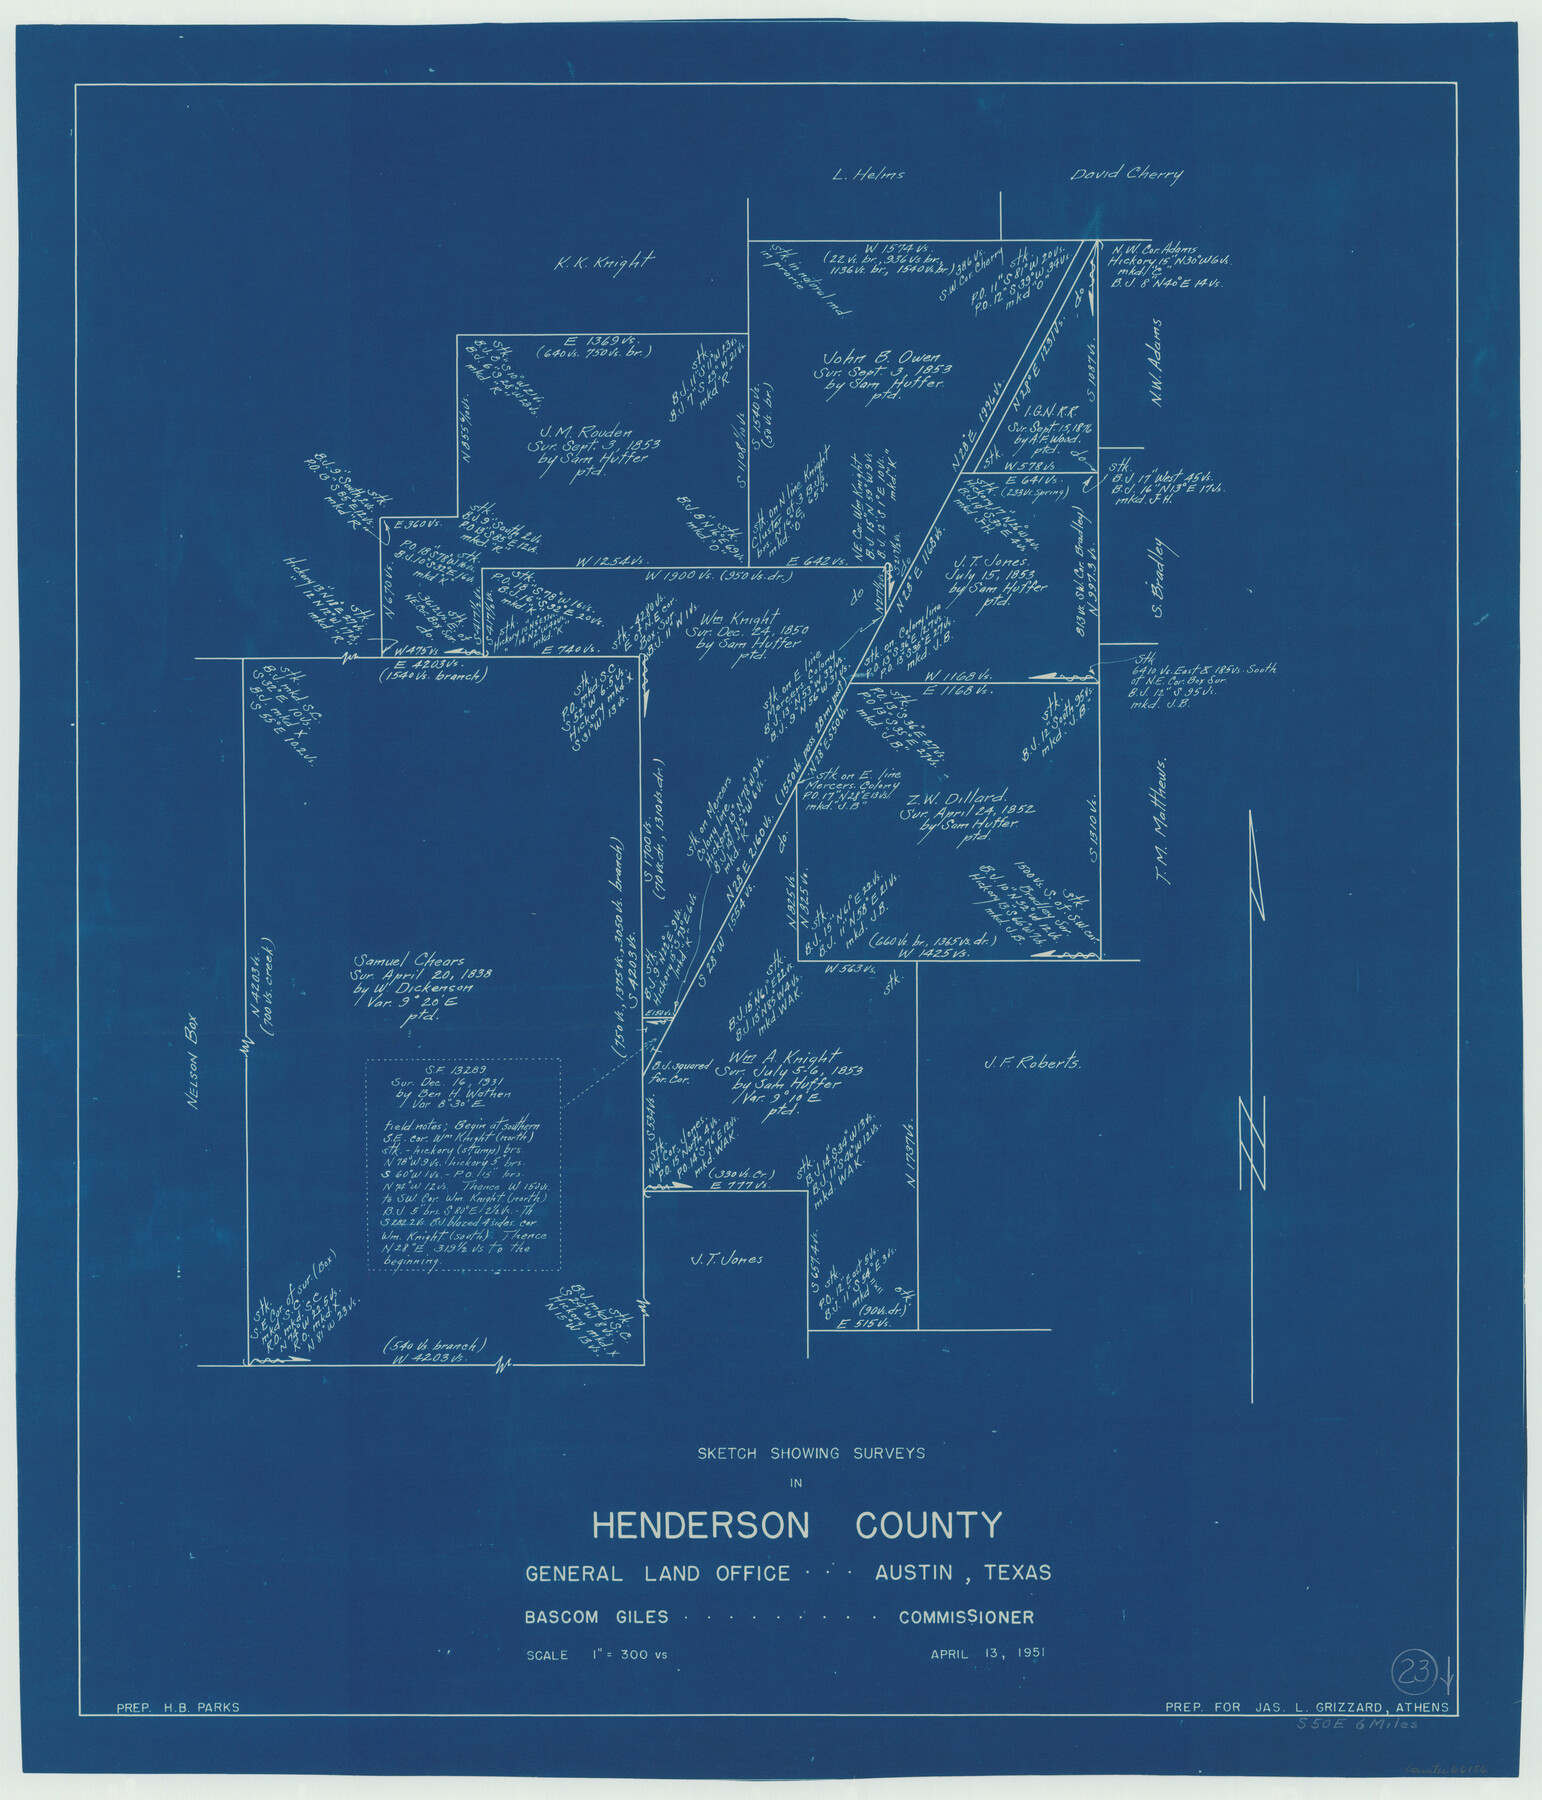 66156, Henderson County Working Sketch 23, General Map Collection